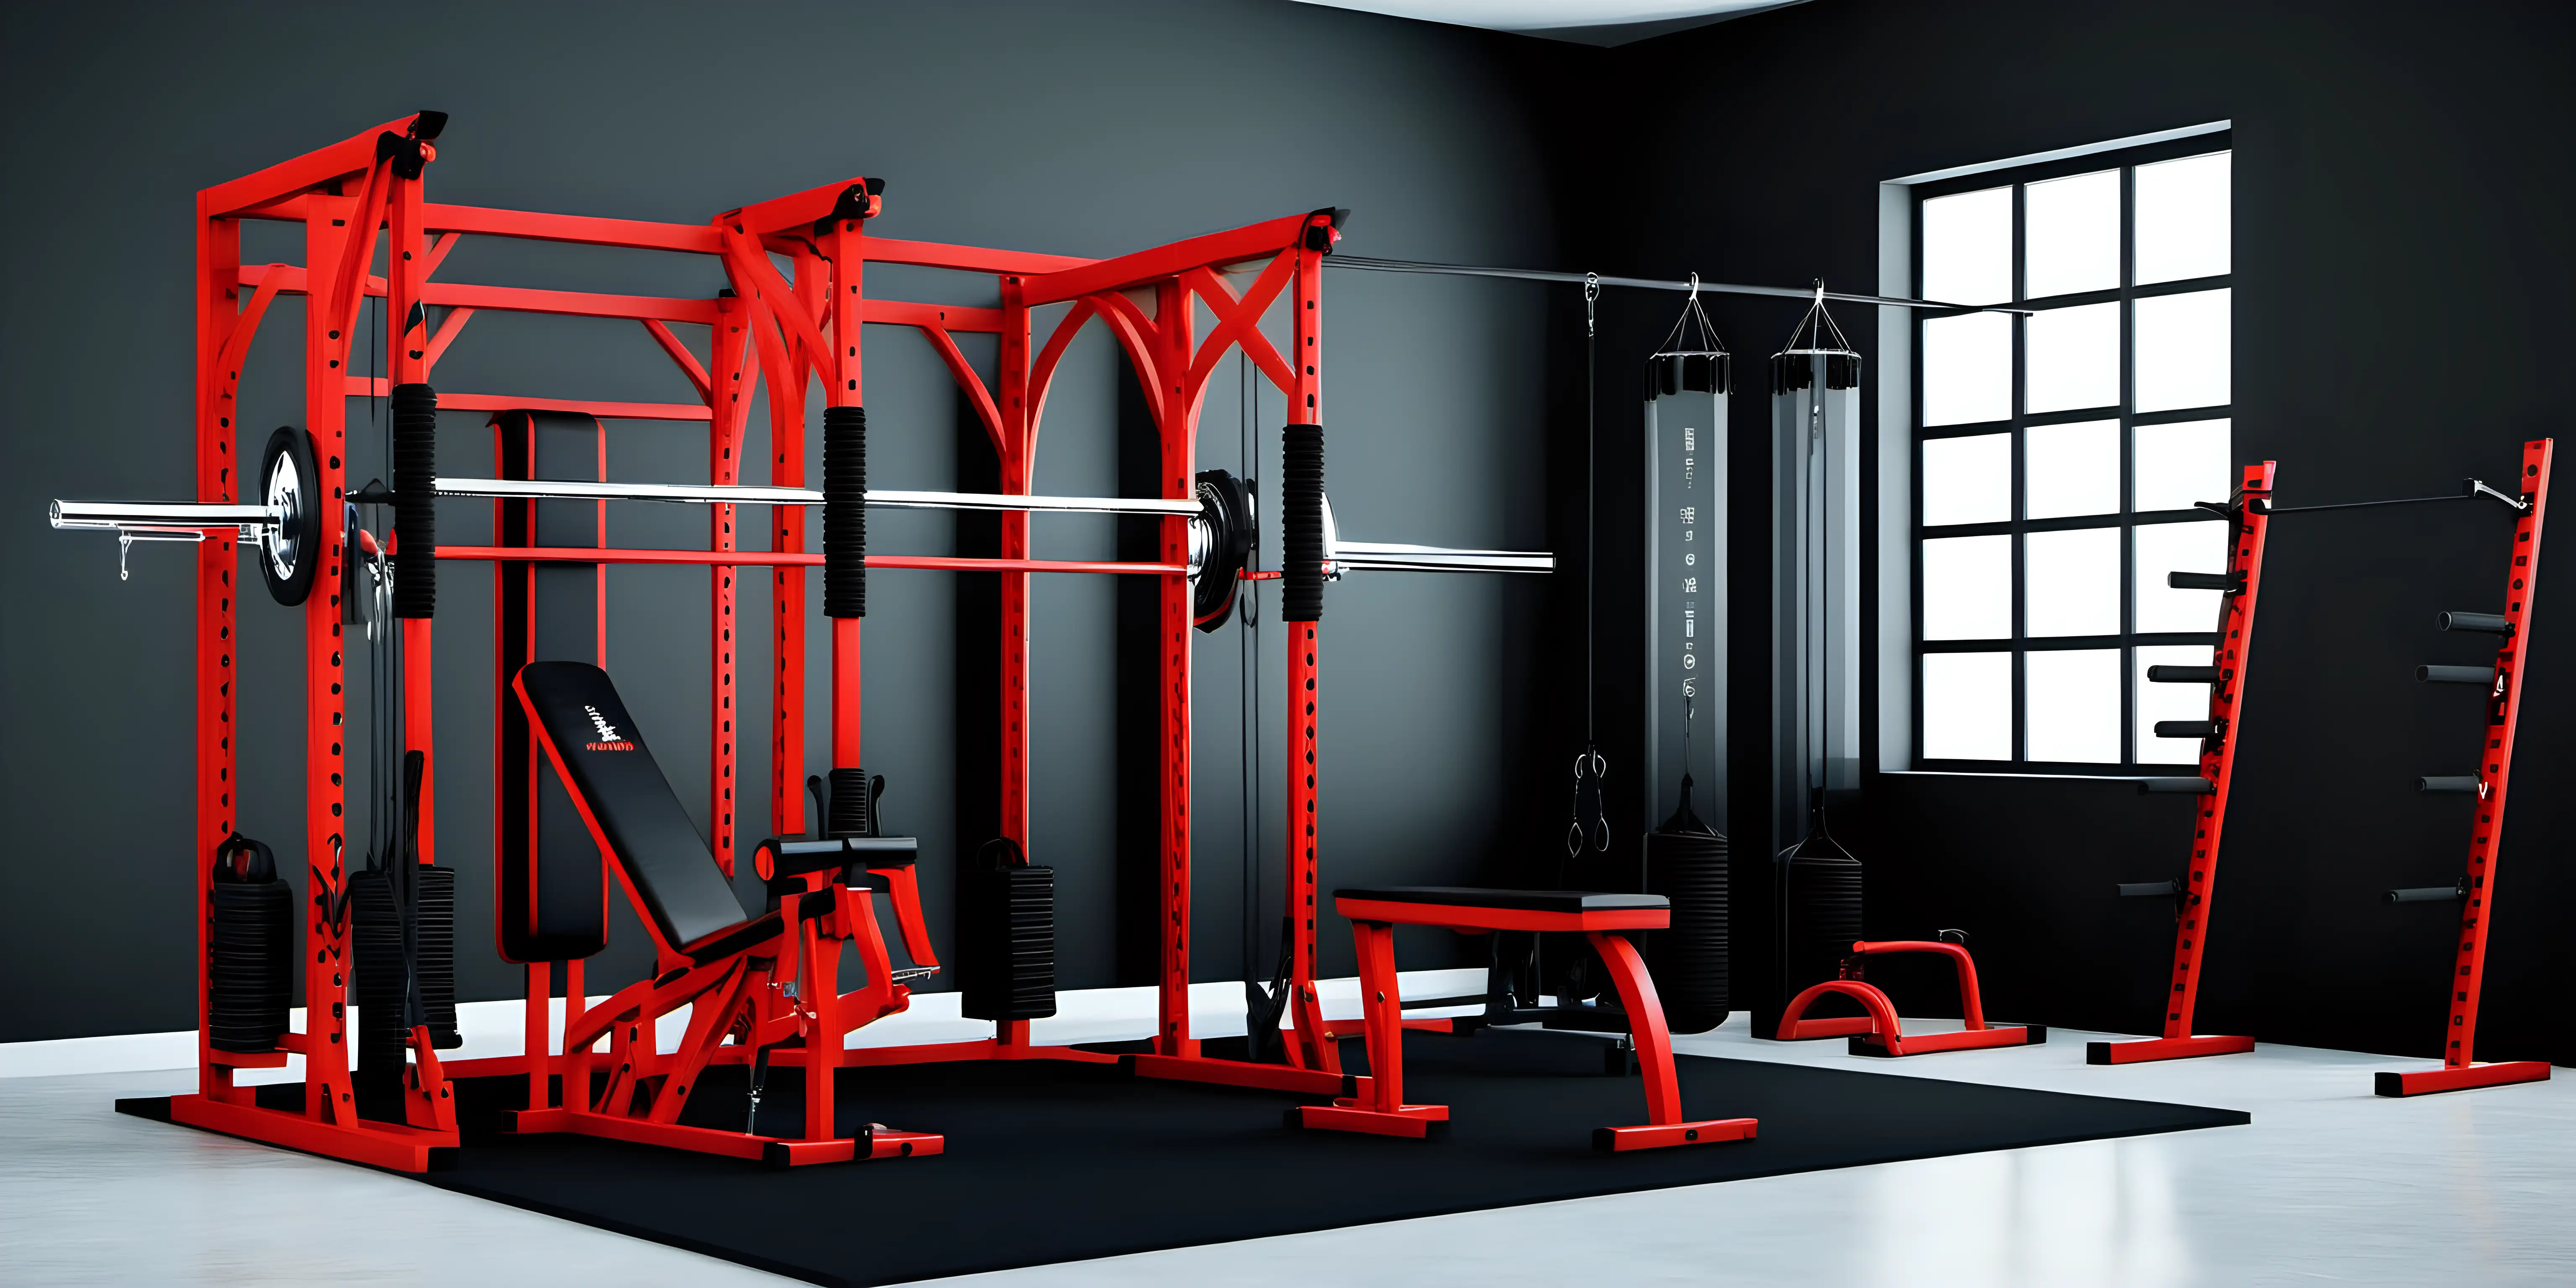 Dynamic Red and Black Studio Gym Setup for Energizing Workouts